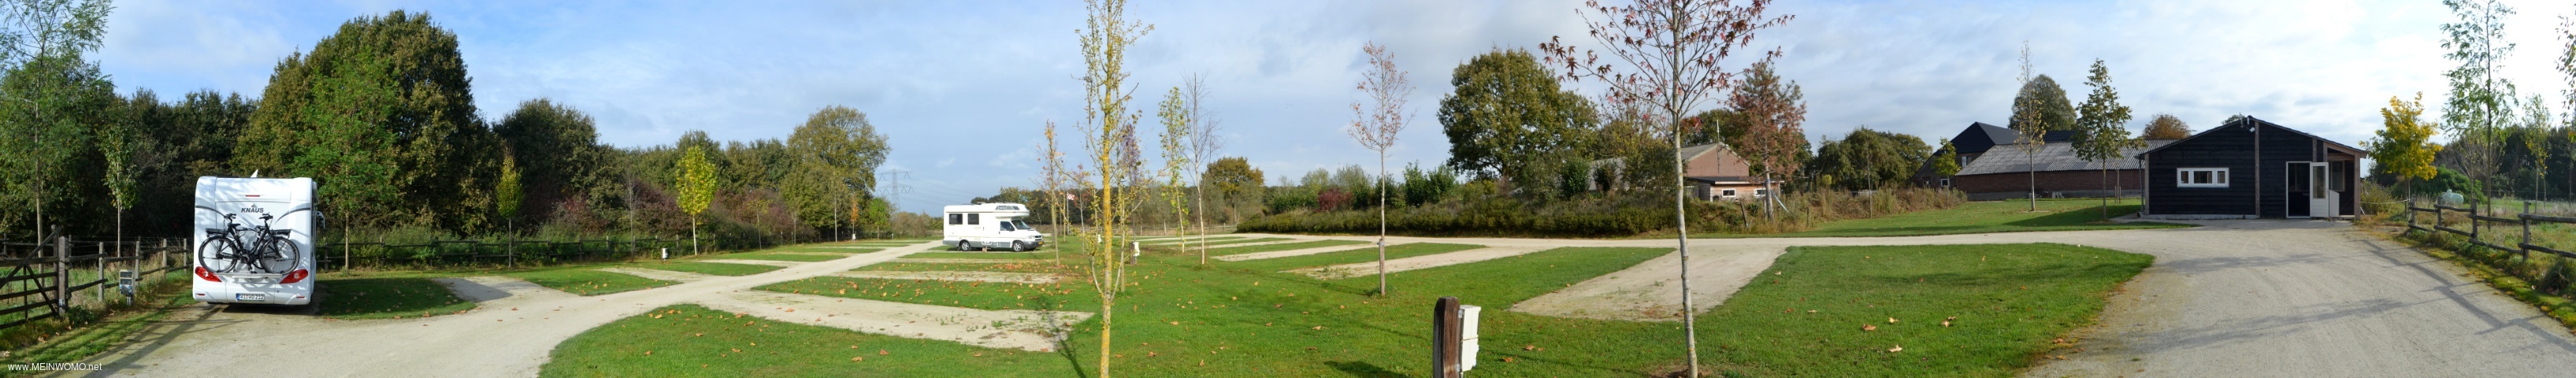  Panoramic view of the pitches